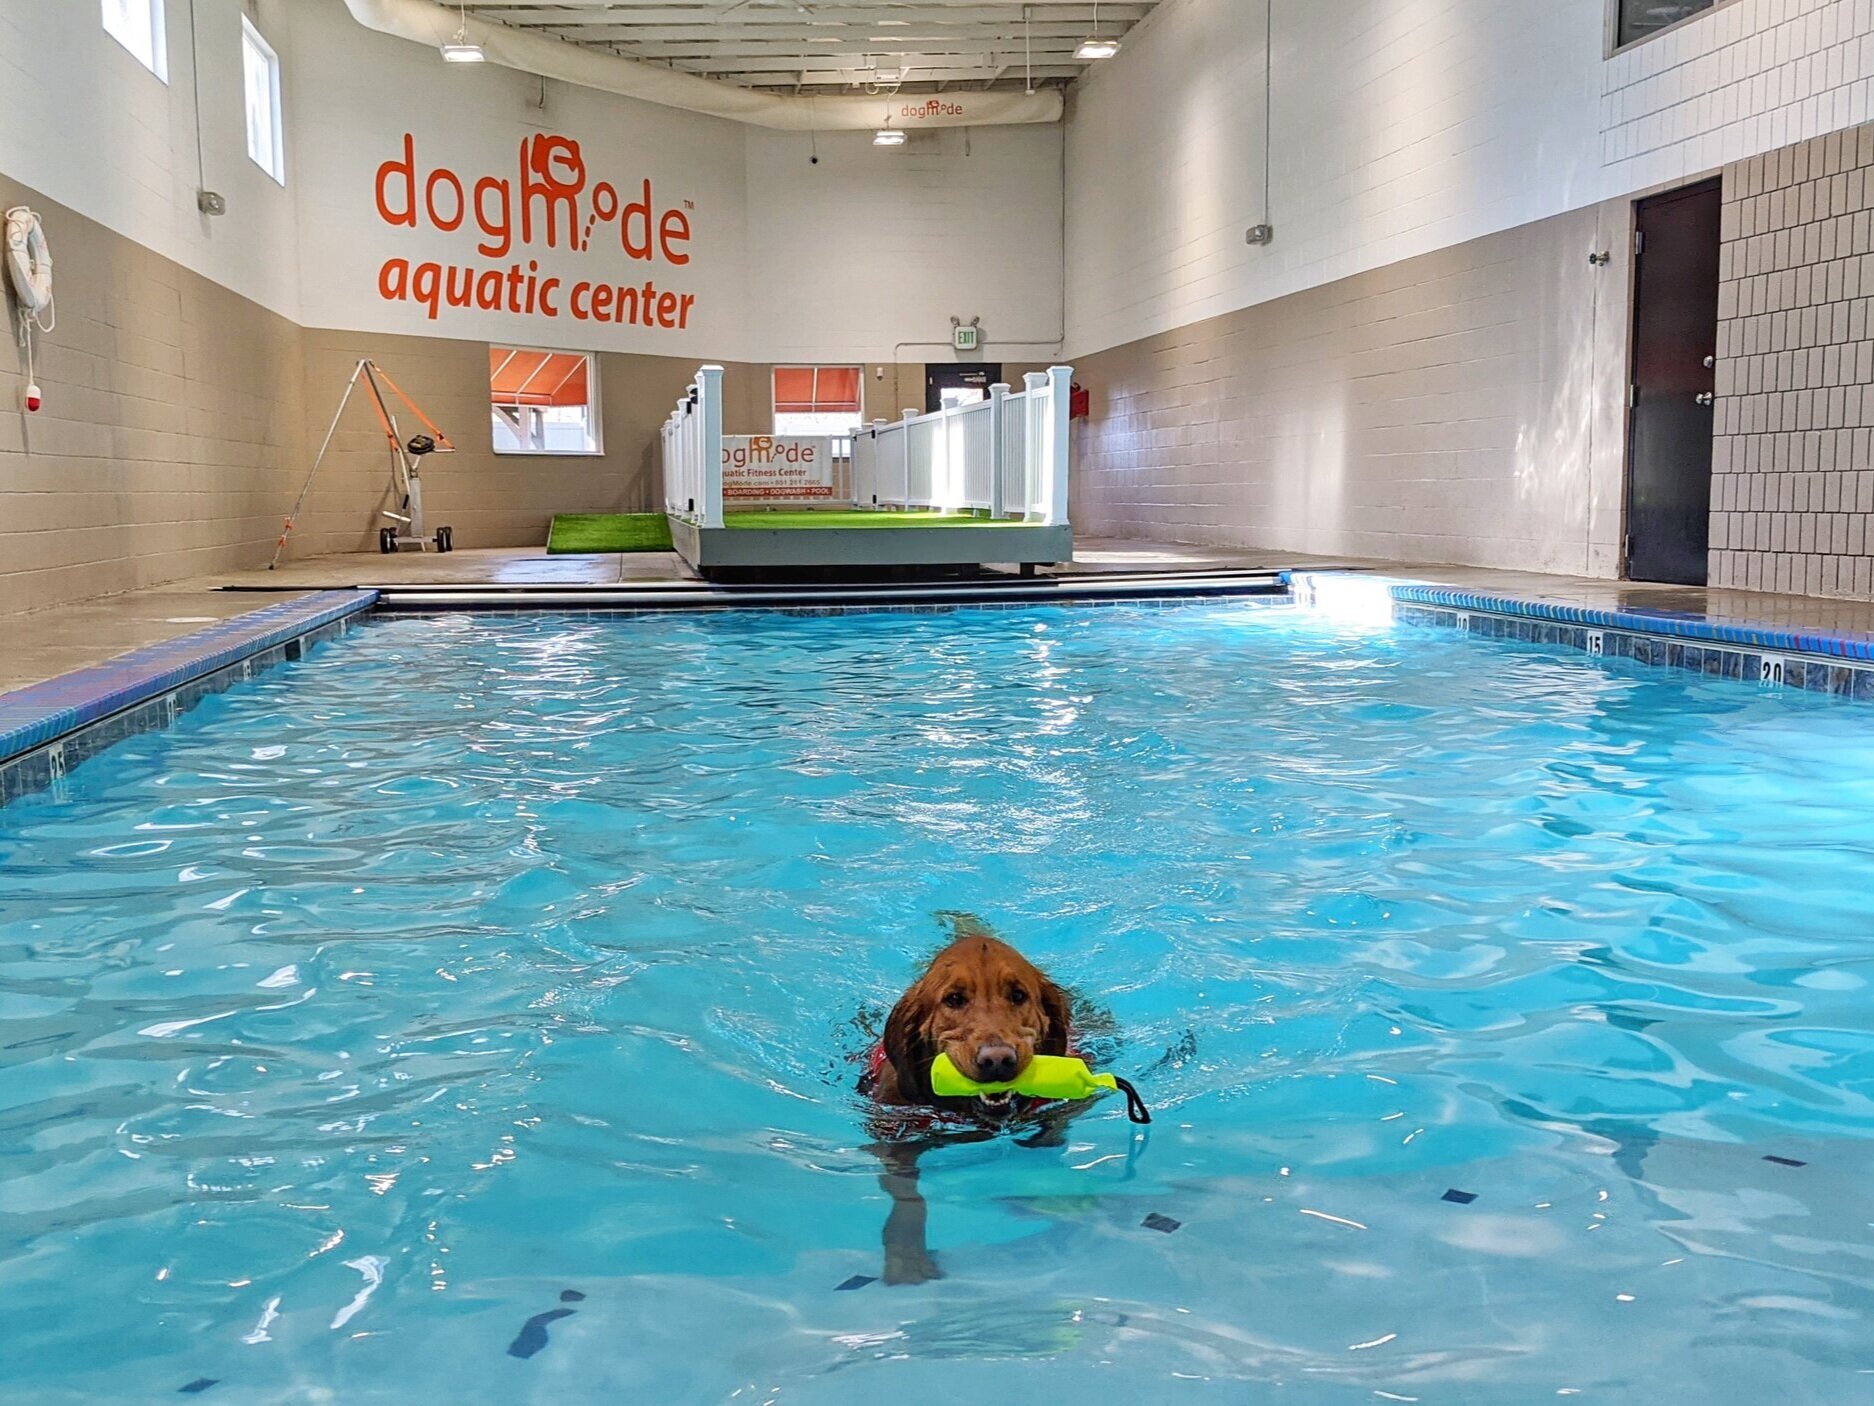 Golden retriever Scout swims toward the camera in an indoor pool holding a neon green float toy